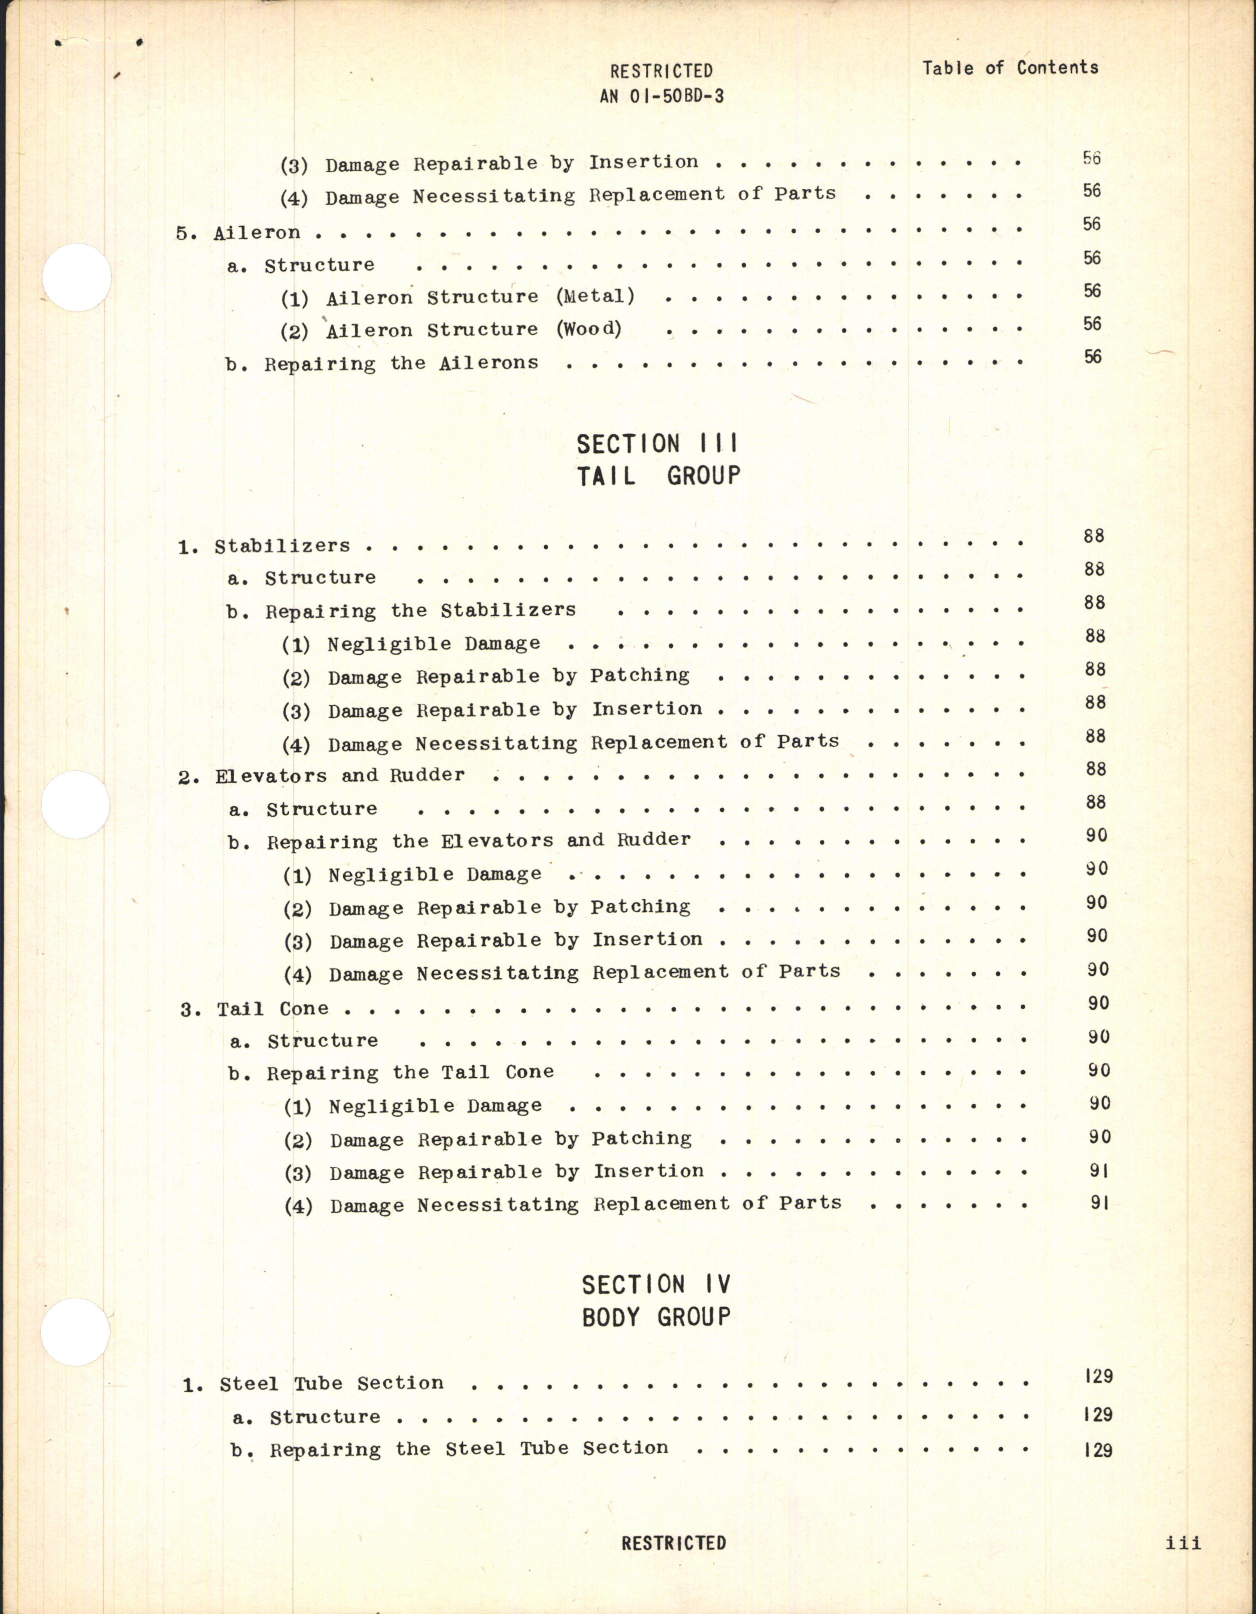 Sample page 5 from AirCorps Library document: Structural Repair Instructions for BT-13B-VU and SNV-2 Airplanes